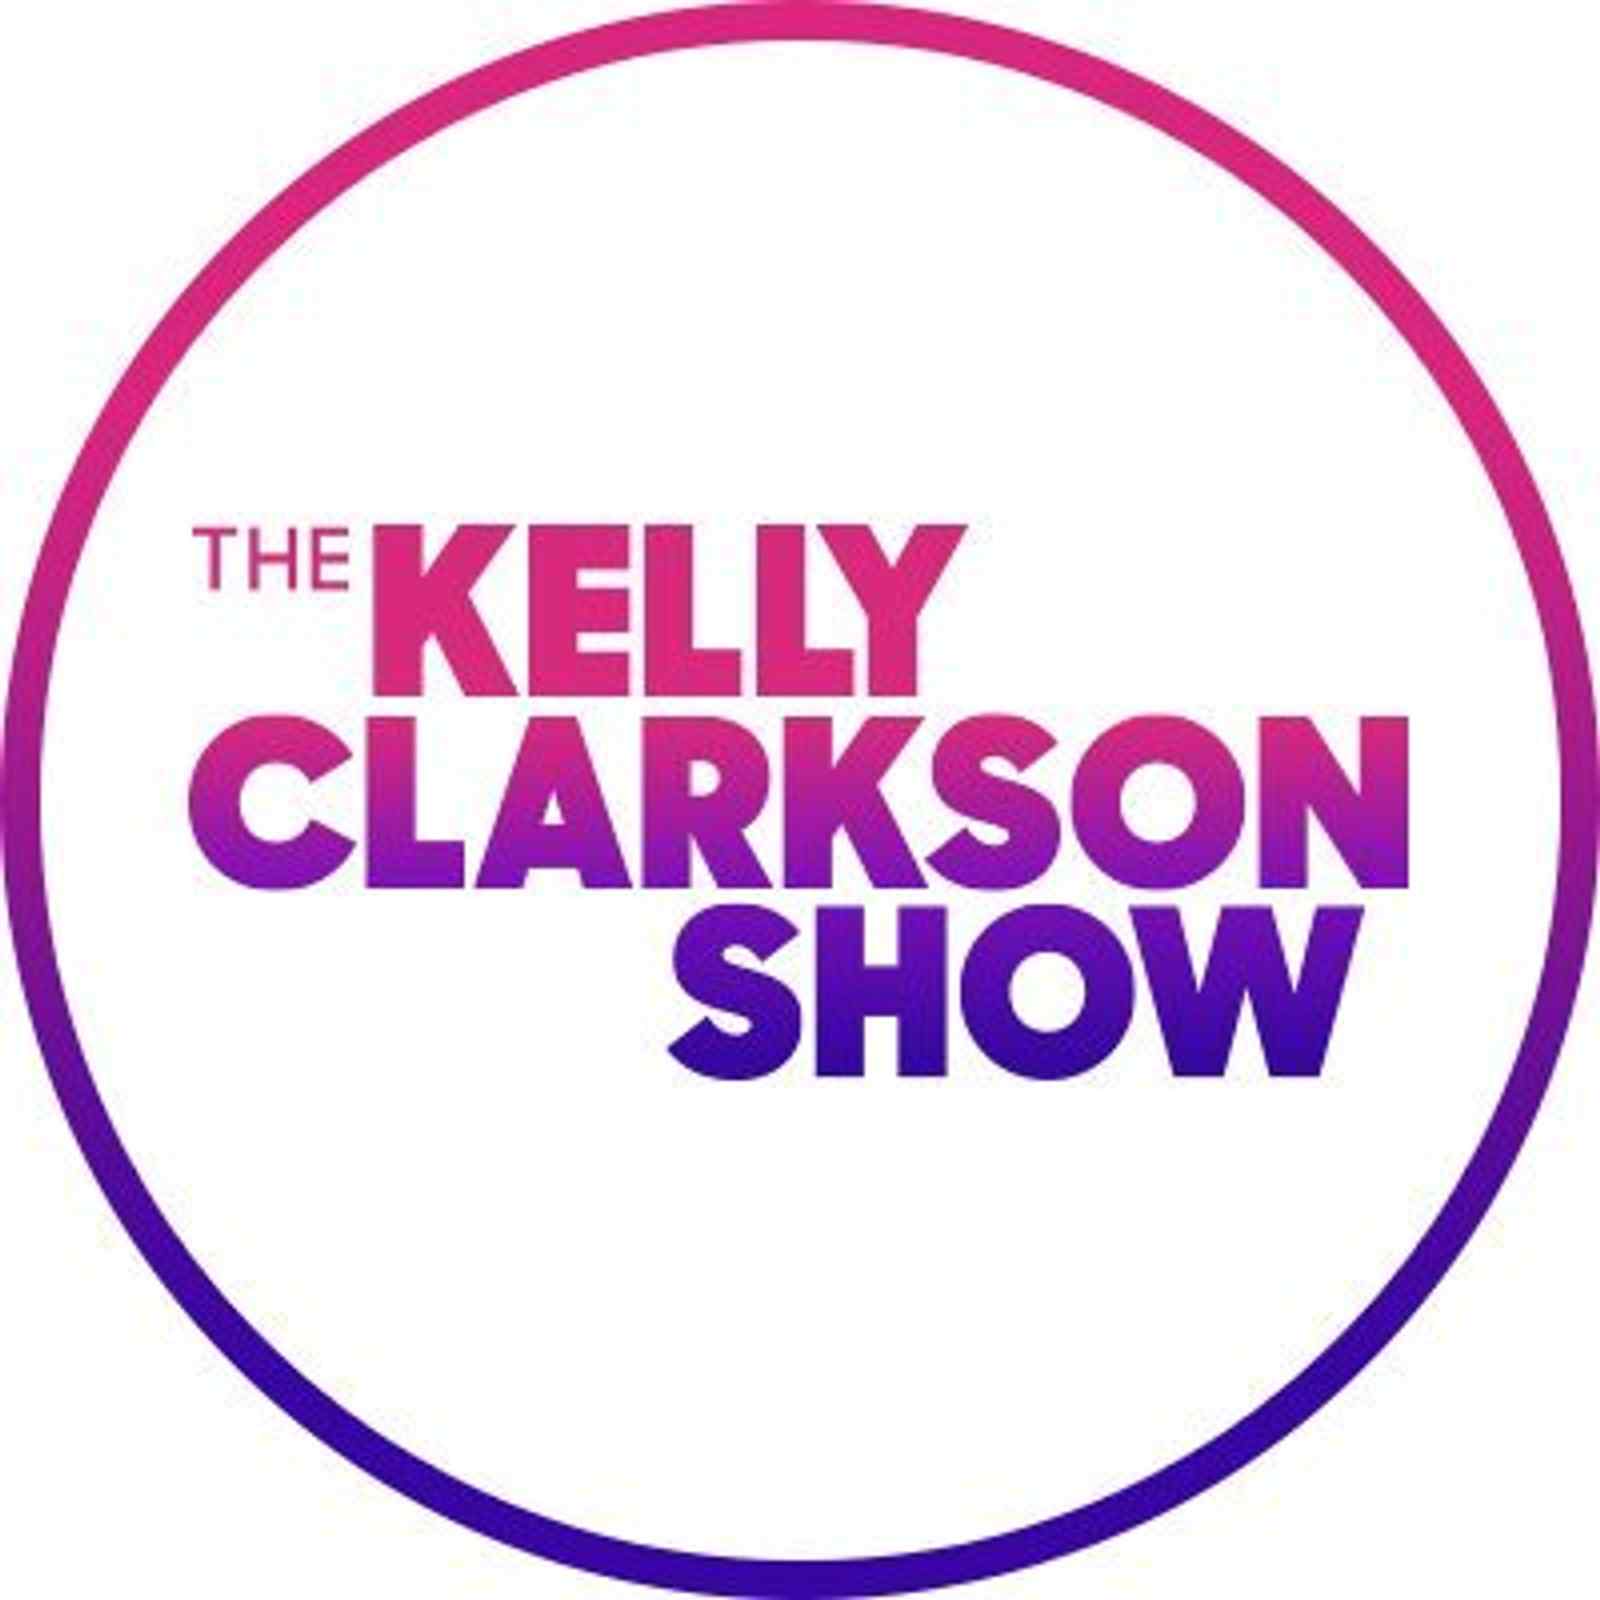 The Kelly Clarkson Show: Old Dominion